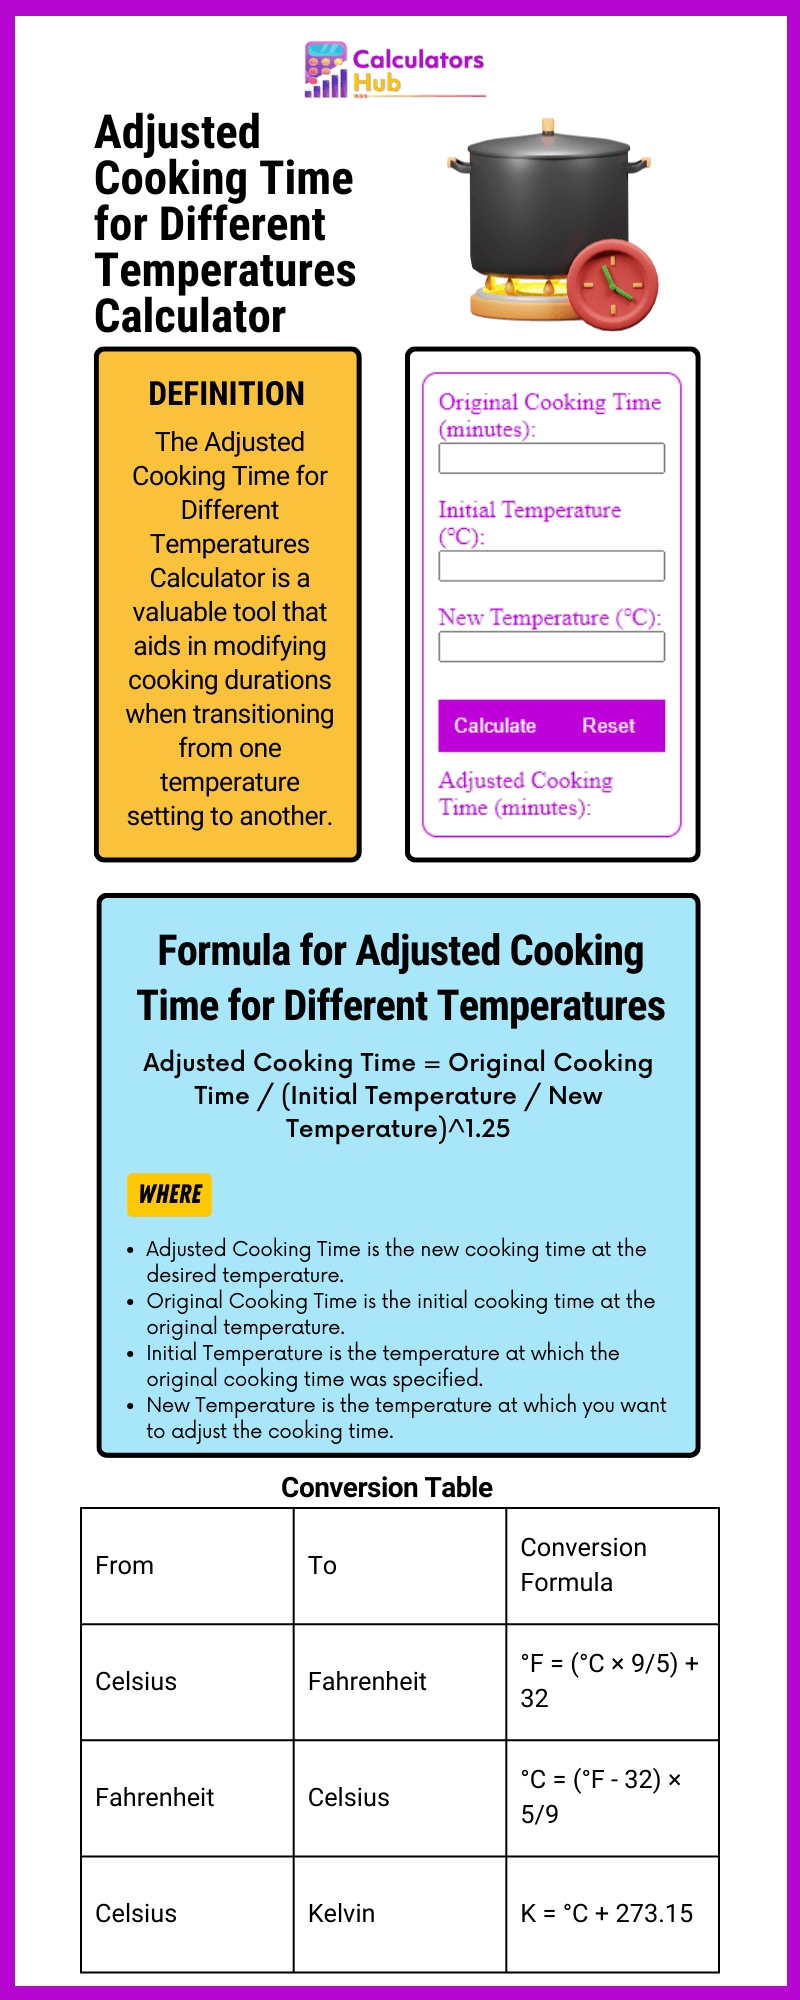 Adjusted Cooking Time for Different Temperatures Calculator